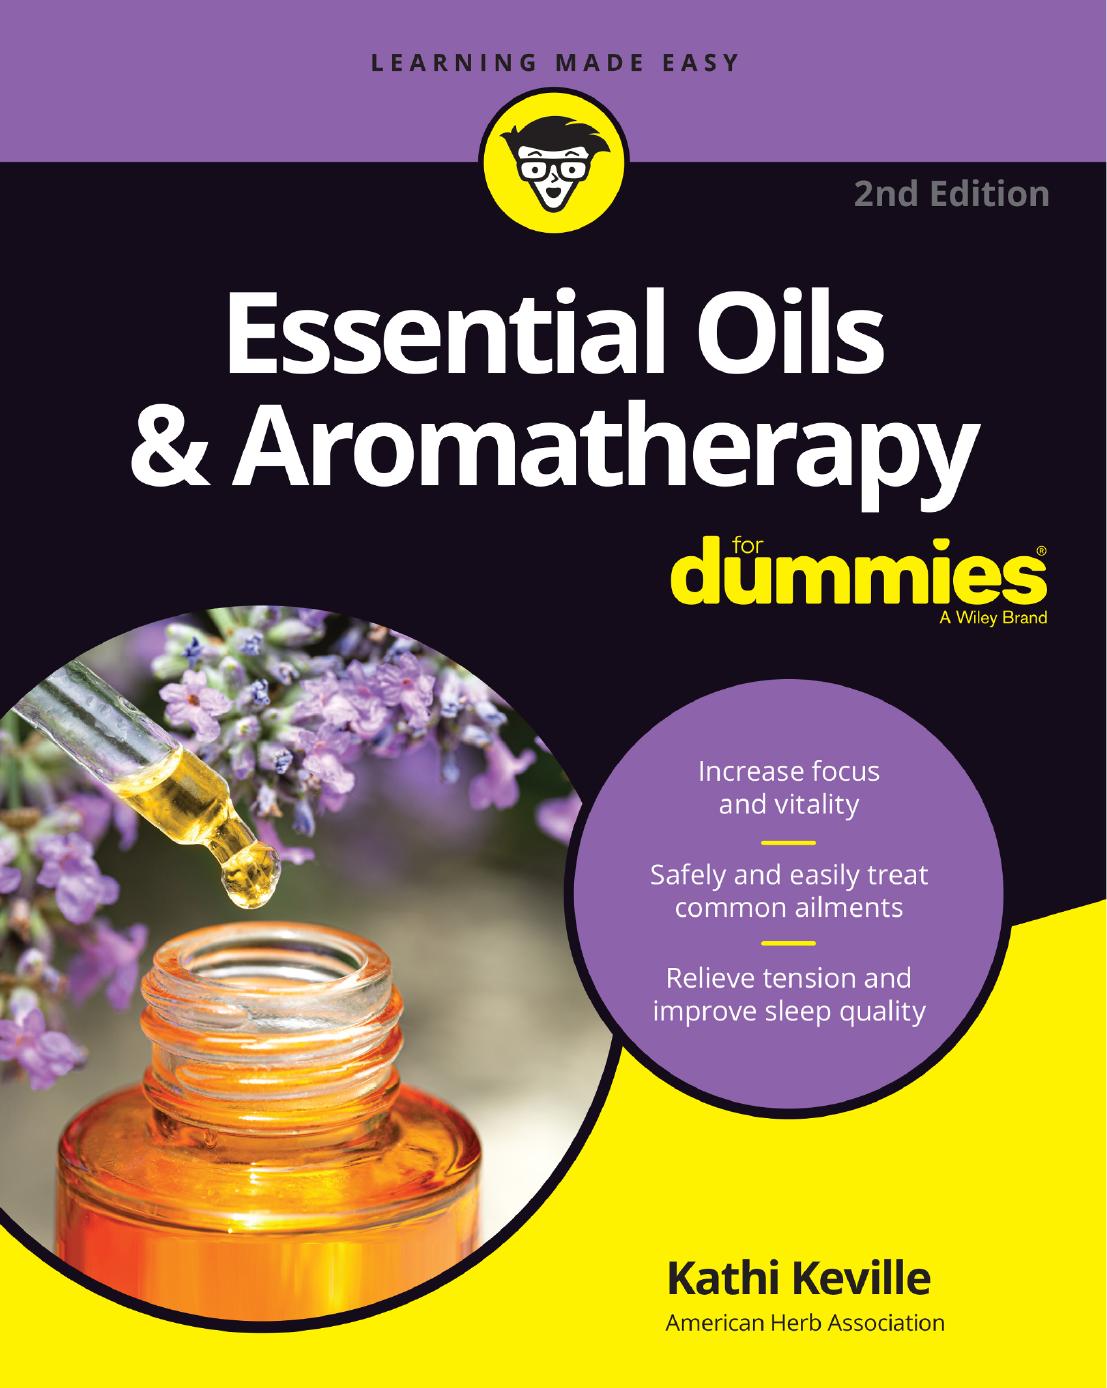 Essential Oils & Aromatherapy For Dummies by Kathi Keville